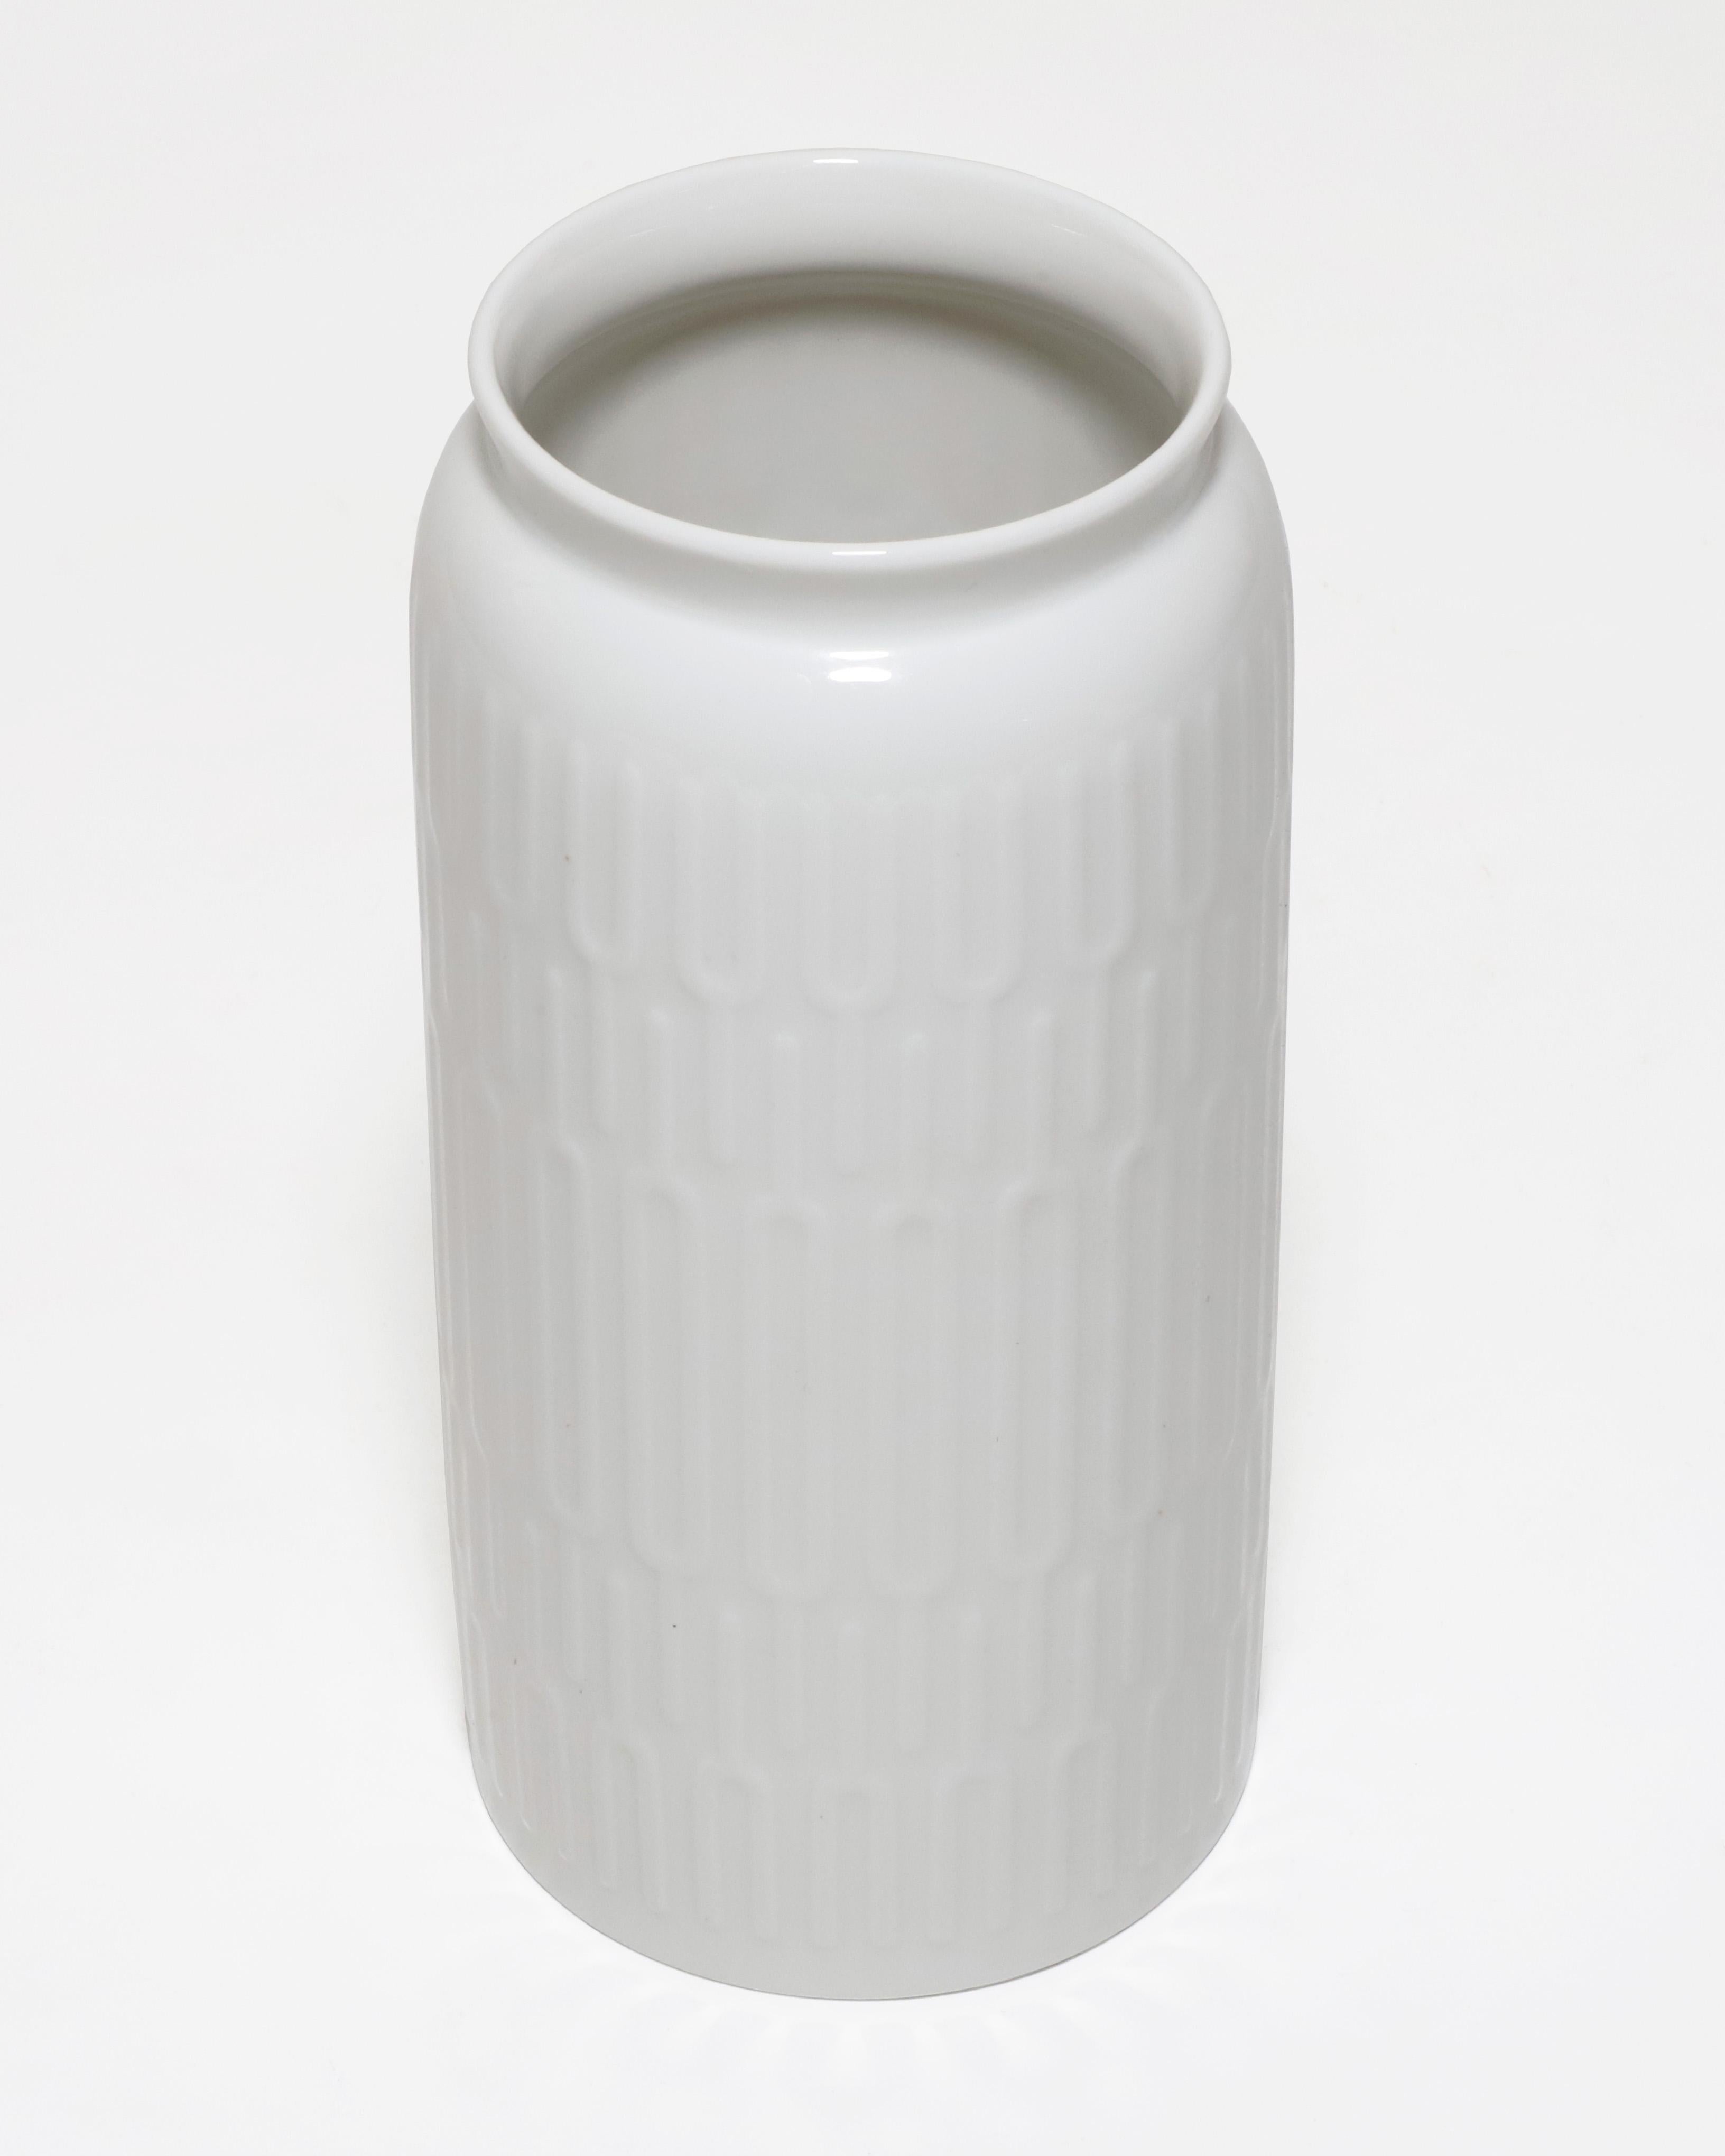 Royal Copenhagen 4218 white vase with relief designed by Thorkild Olsen in the 1950s. Beautiful minimal modern pattern design around the vase. A perfect flower vase for a table center decoration. 

Property from esteemed interior designer Juan